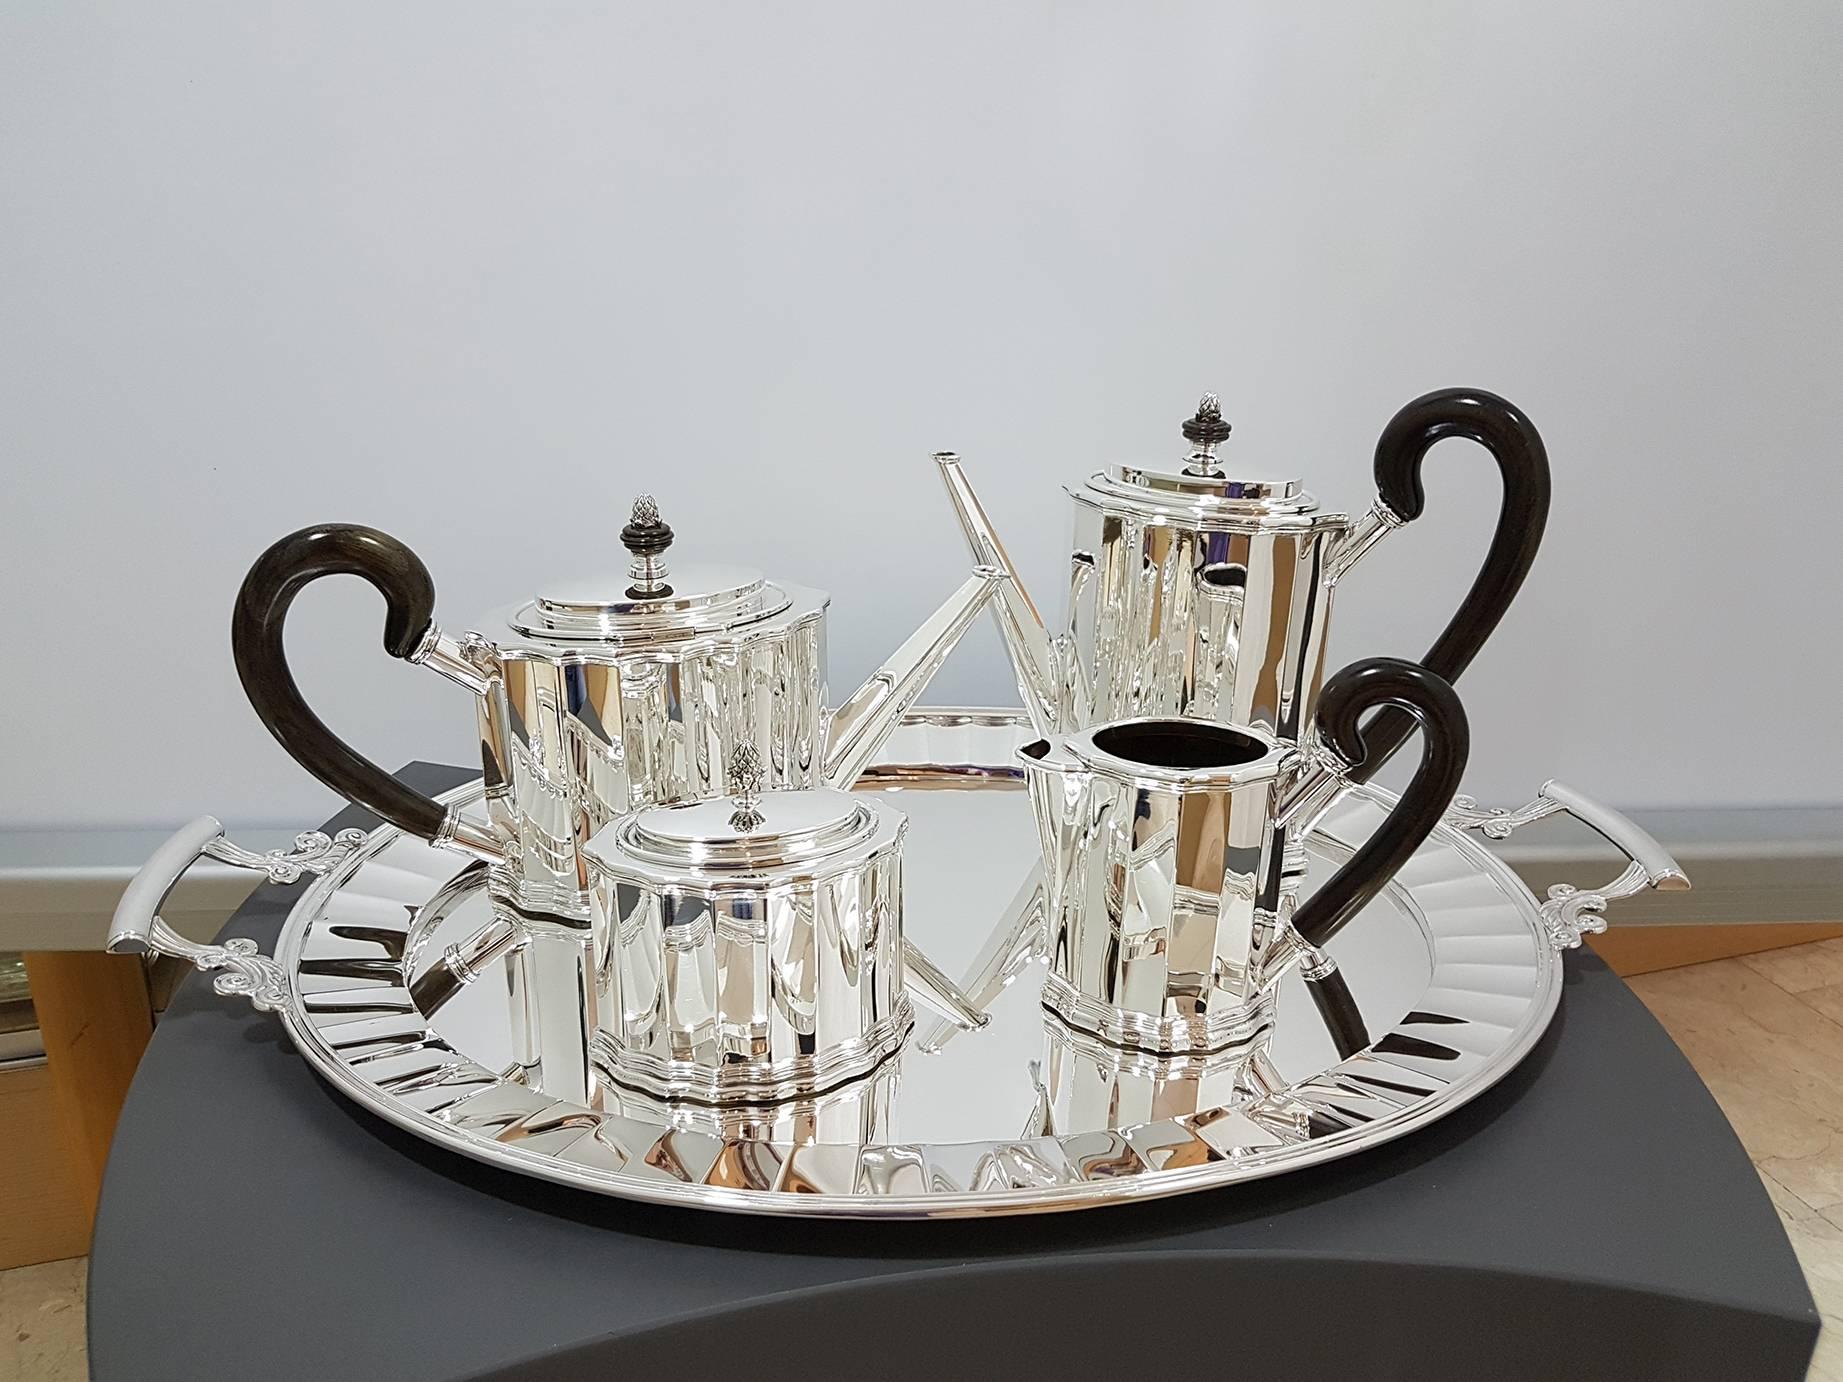 Fully handmade sterling silver tea and coffee set.
The shape is oval with concave grooves that make the tea and coffee service extremely bright.
The upper and lower edges of the coffee pot, teapot, milk jug and sugar bowl have been molded and welded